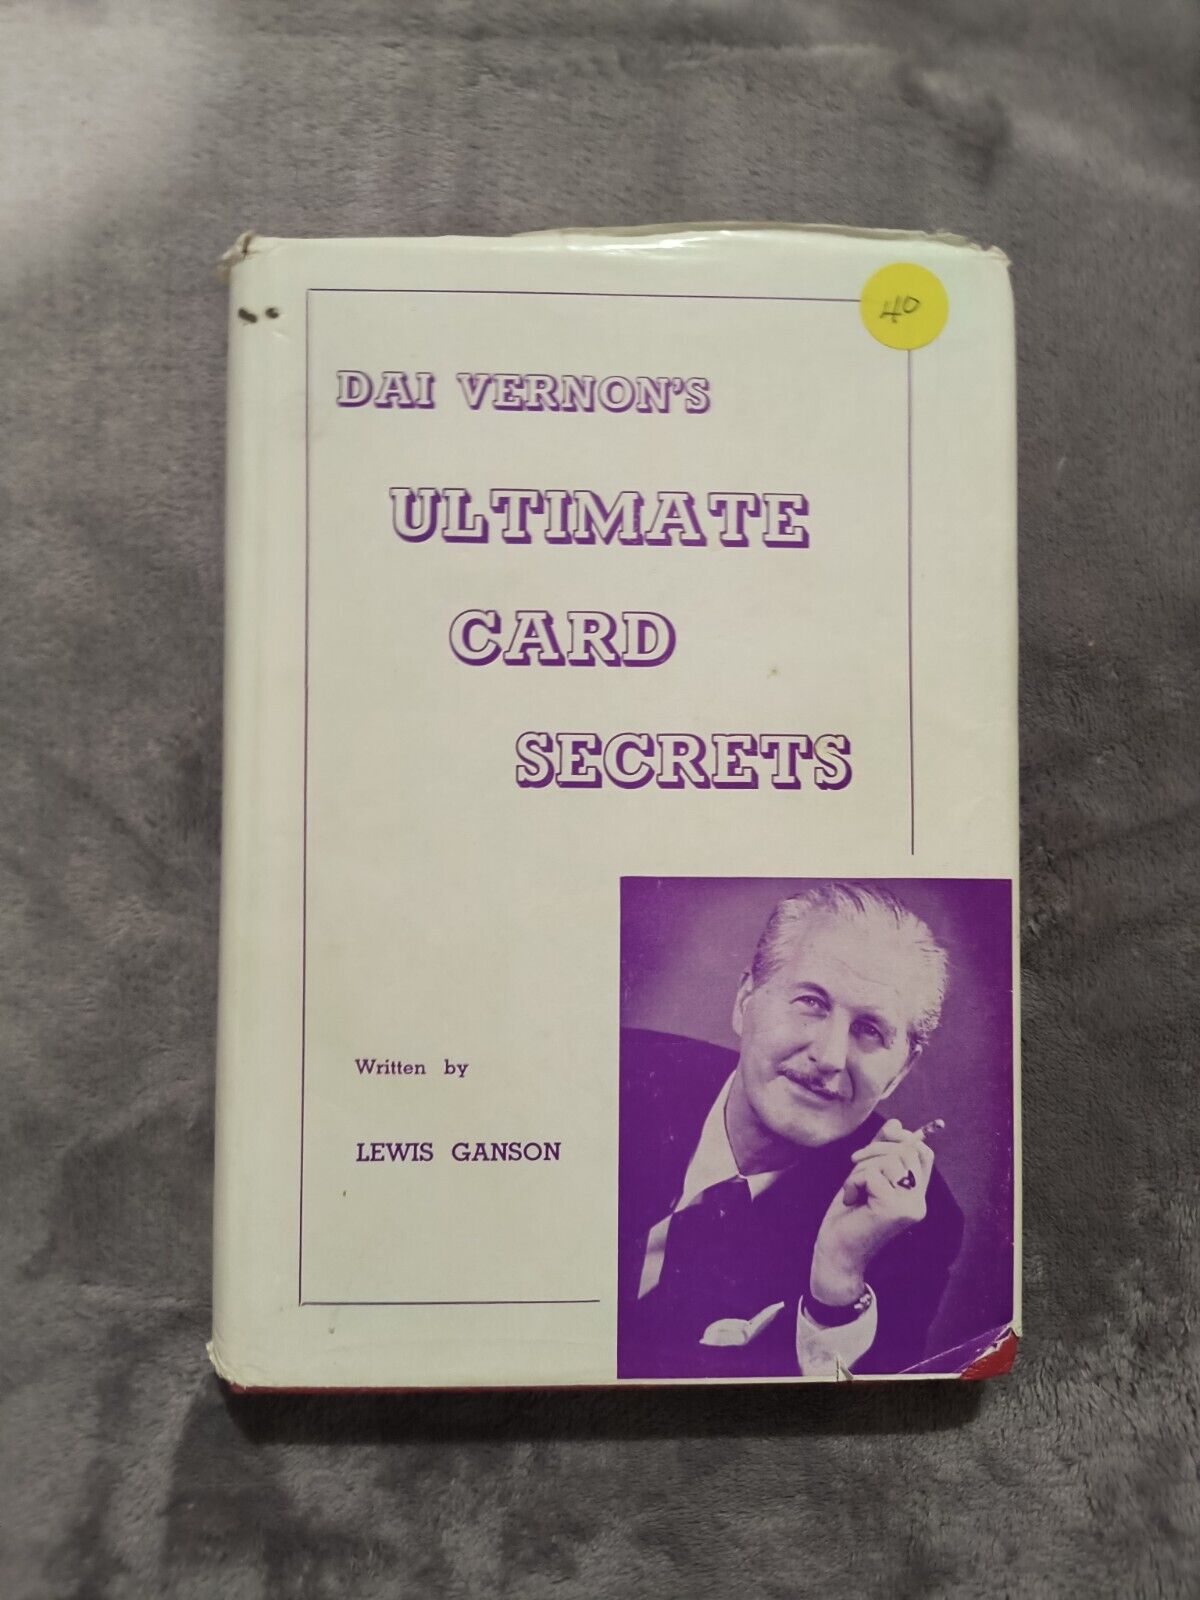 Dai Vernon’s Ultimate Secrets of Card Magic by Lewis Ganson - Harry Stanley Book